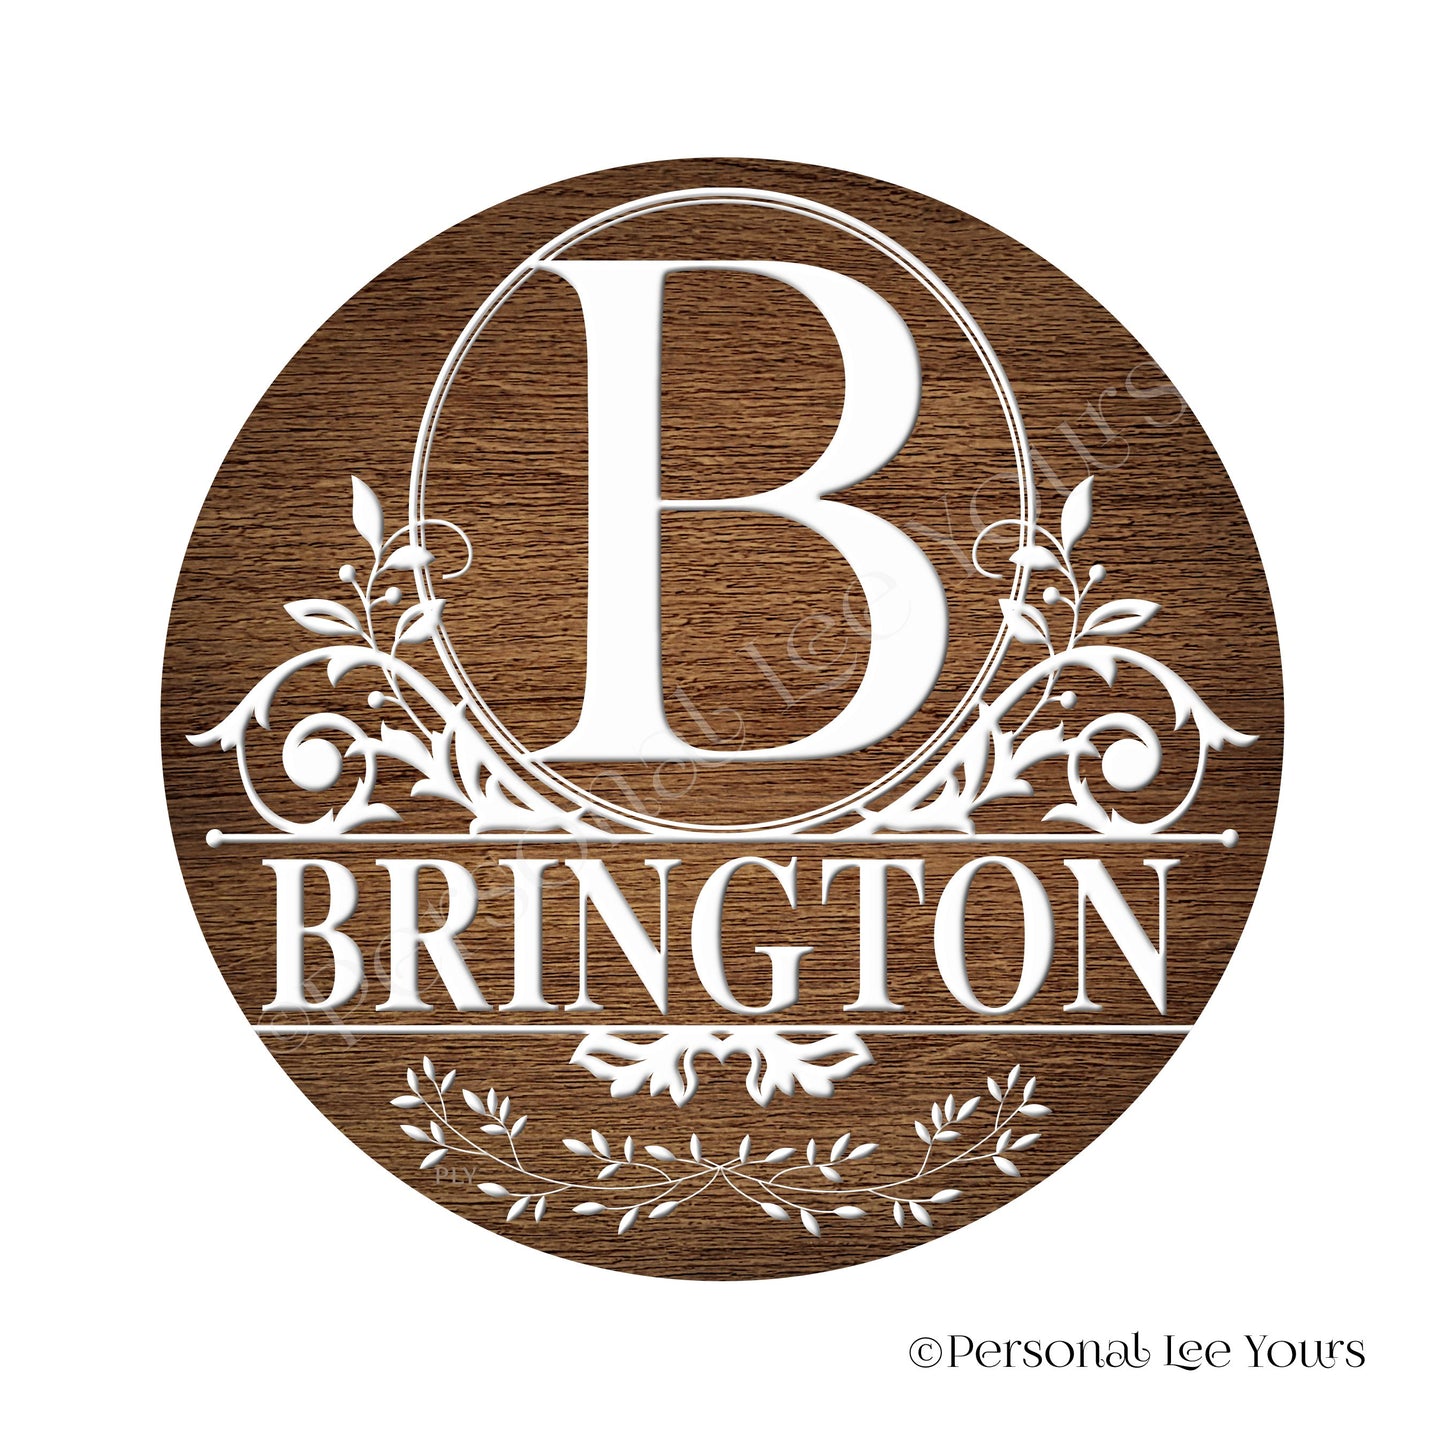 Personalized Wreath Sign * Brington Monogram * "Your  Family Name" * Round * Lightweight Metal